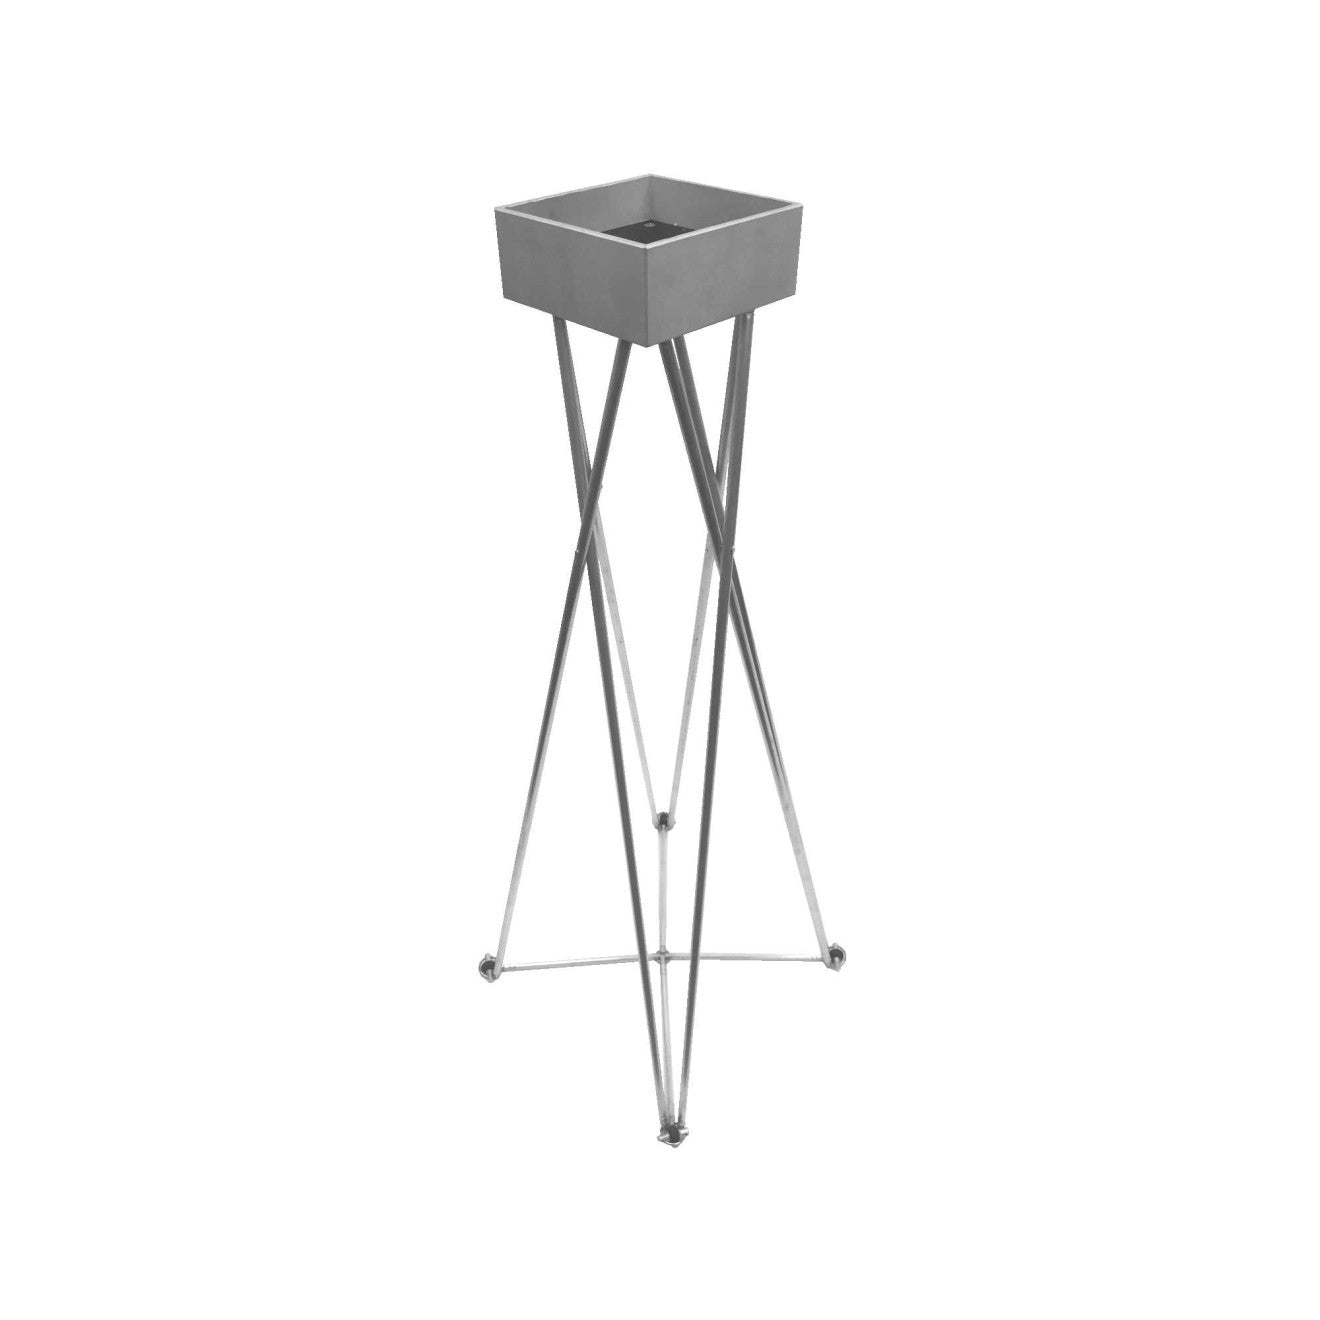 Spider stand with aluminum box - 0